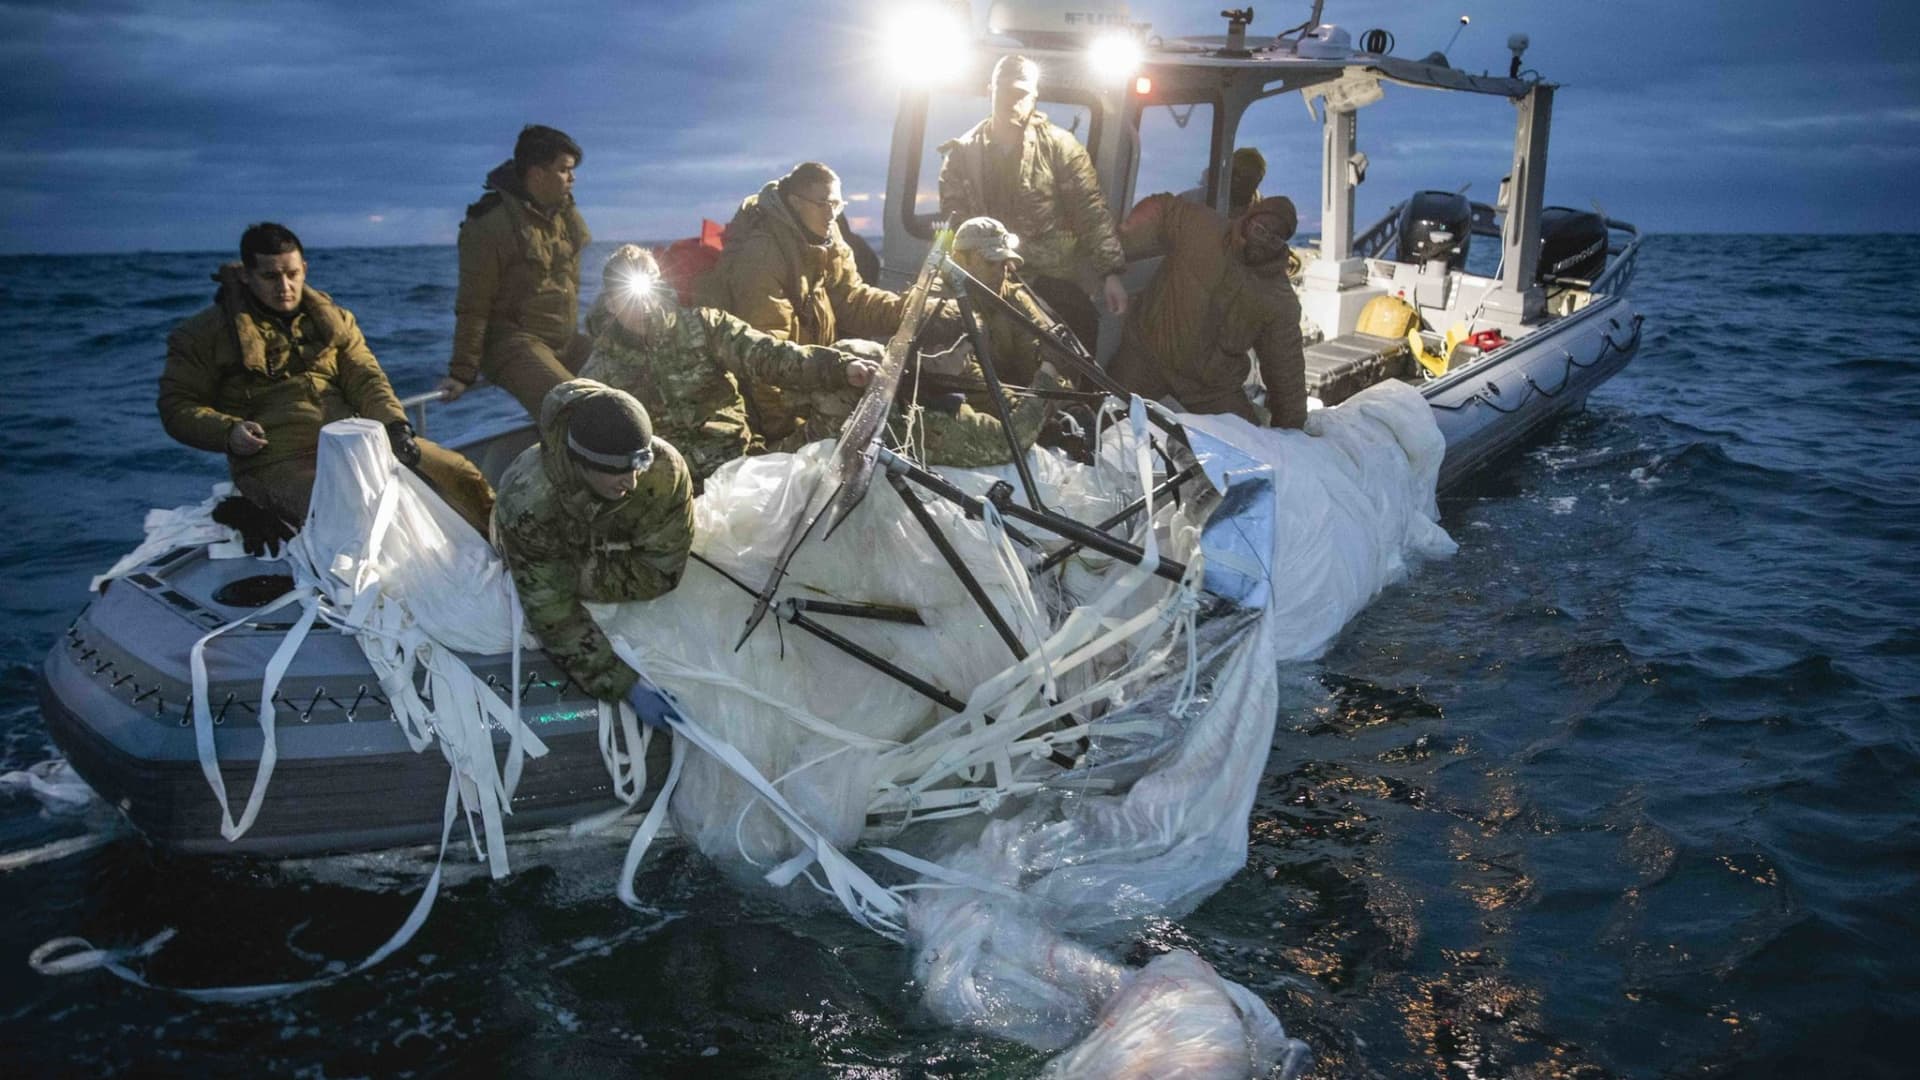 New photos show the Navy recovering downed China spy balloon off U.S. coast - CNBC